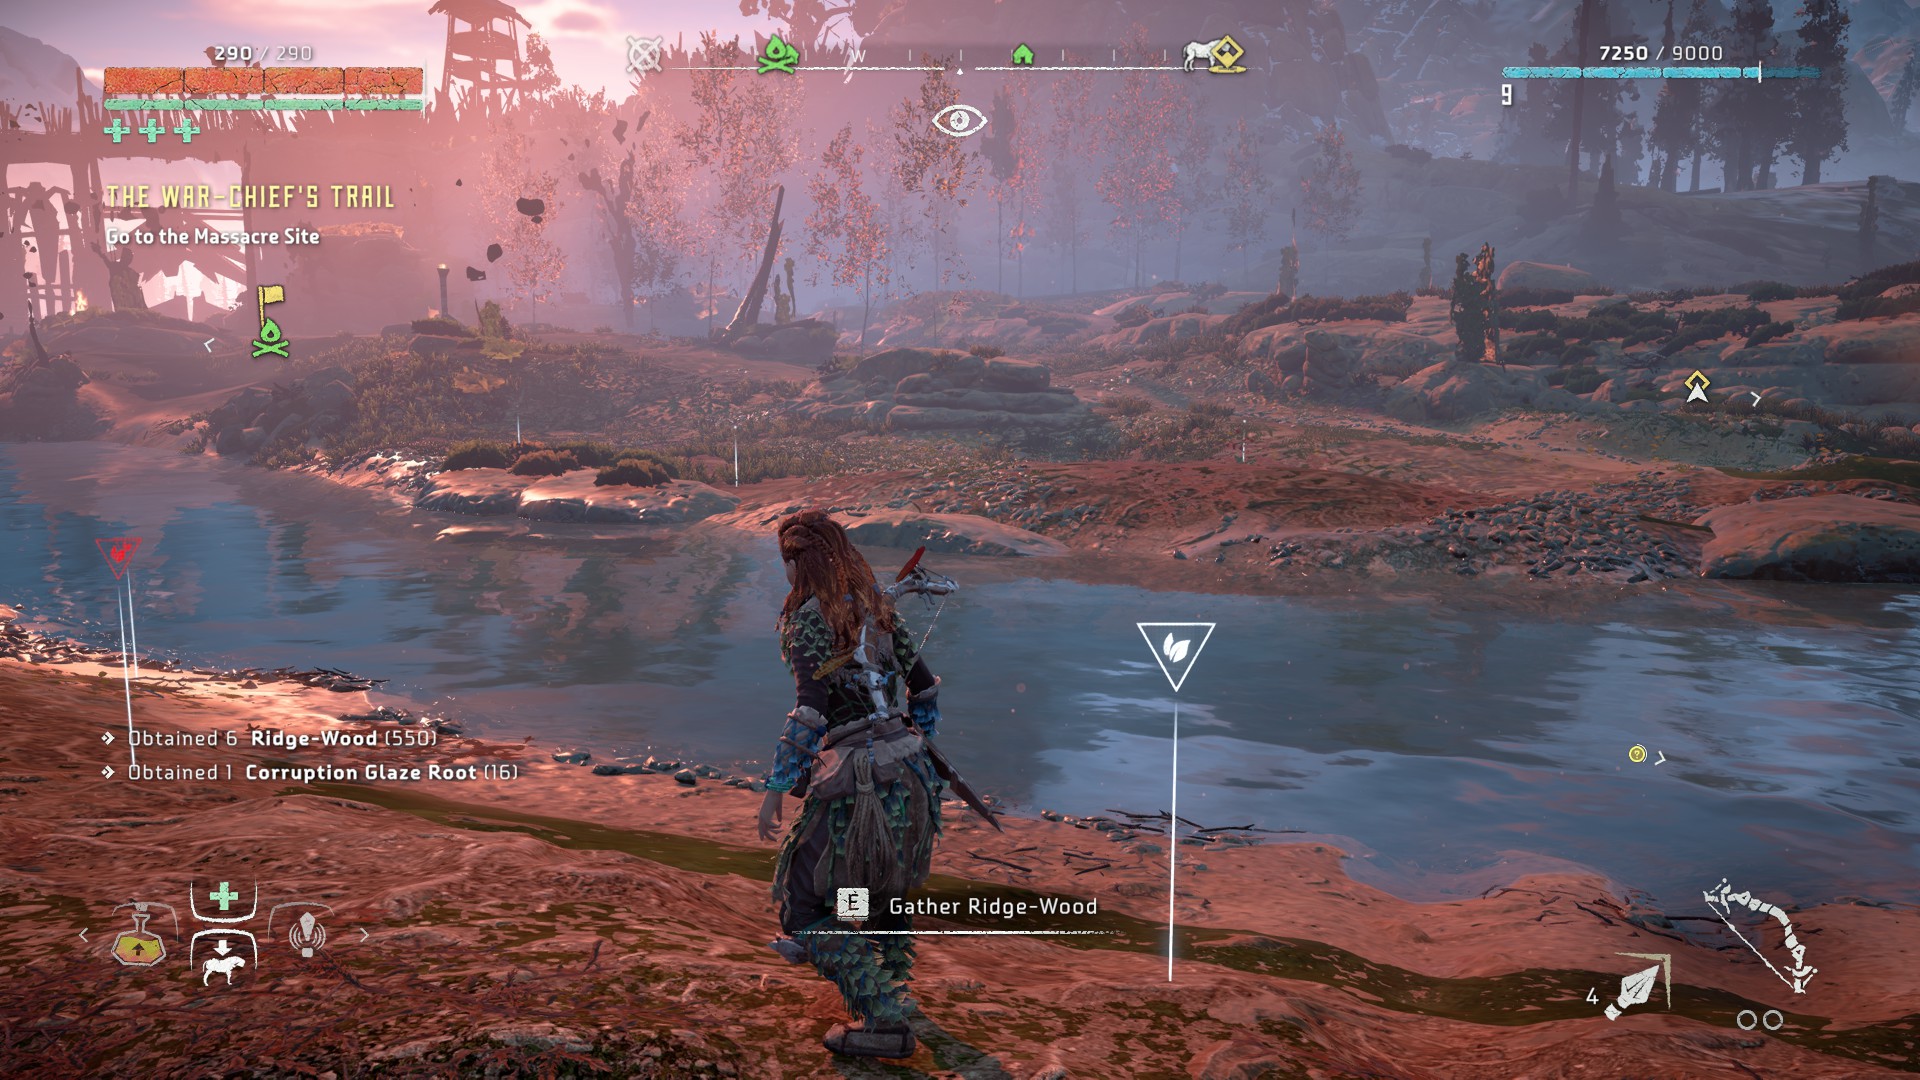 Horizon Zero Dawn Review: almost unplayable and an insult to buyers, benchmarks included